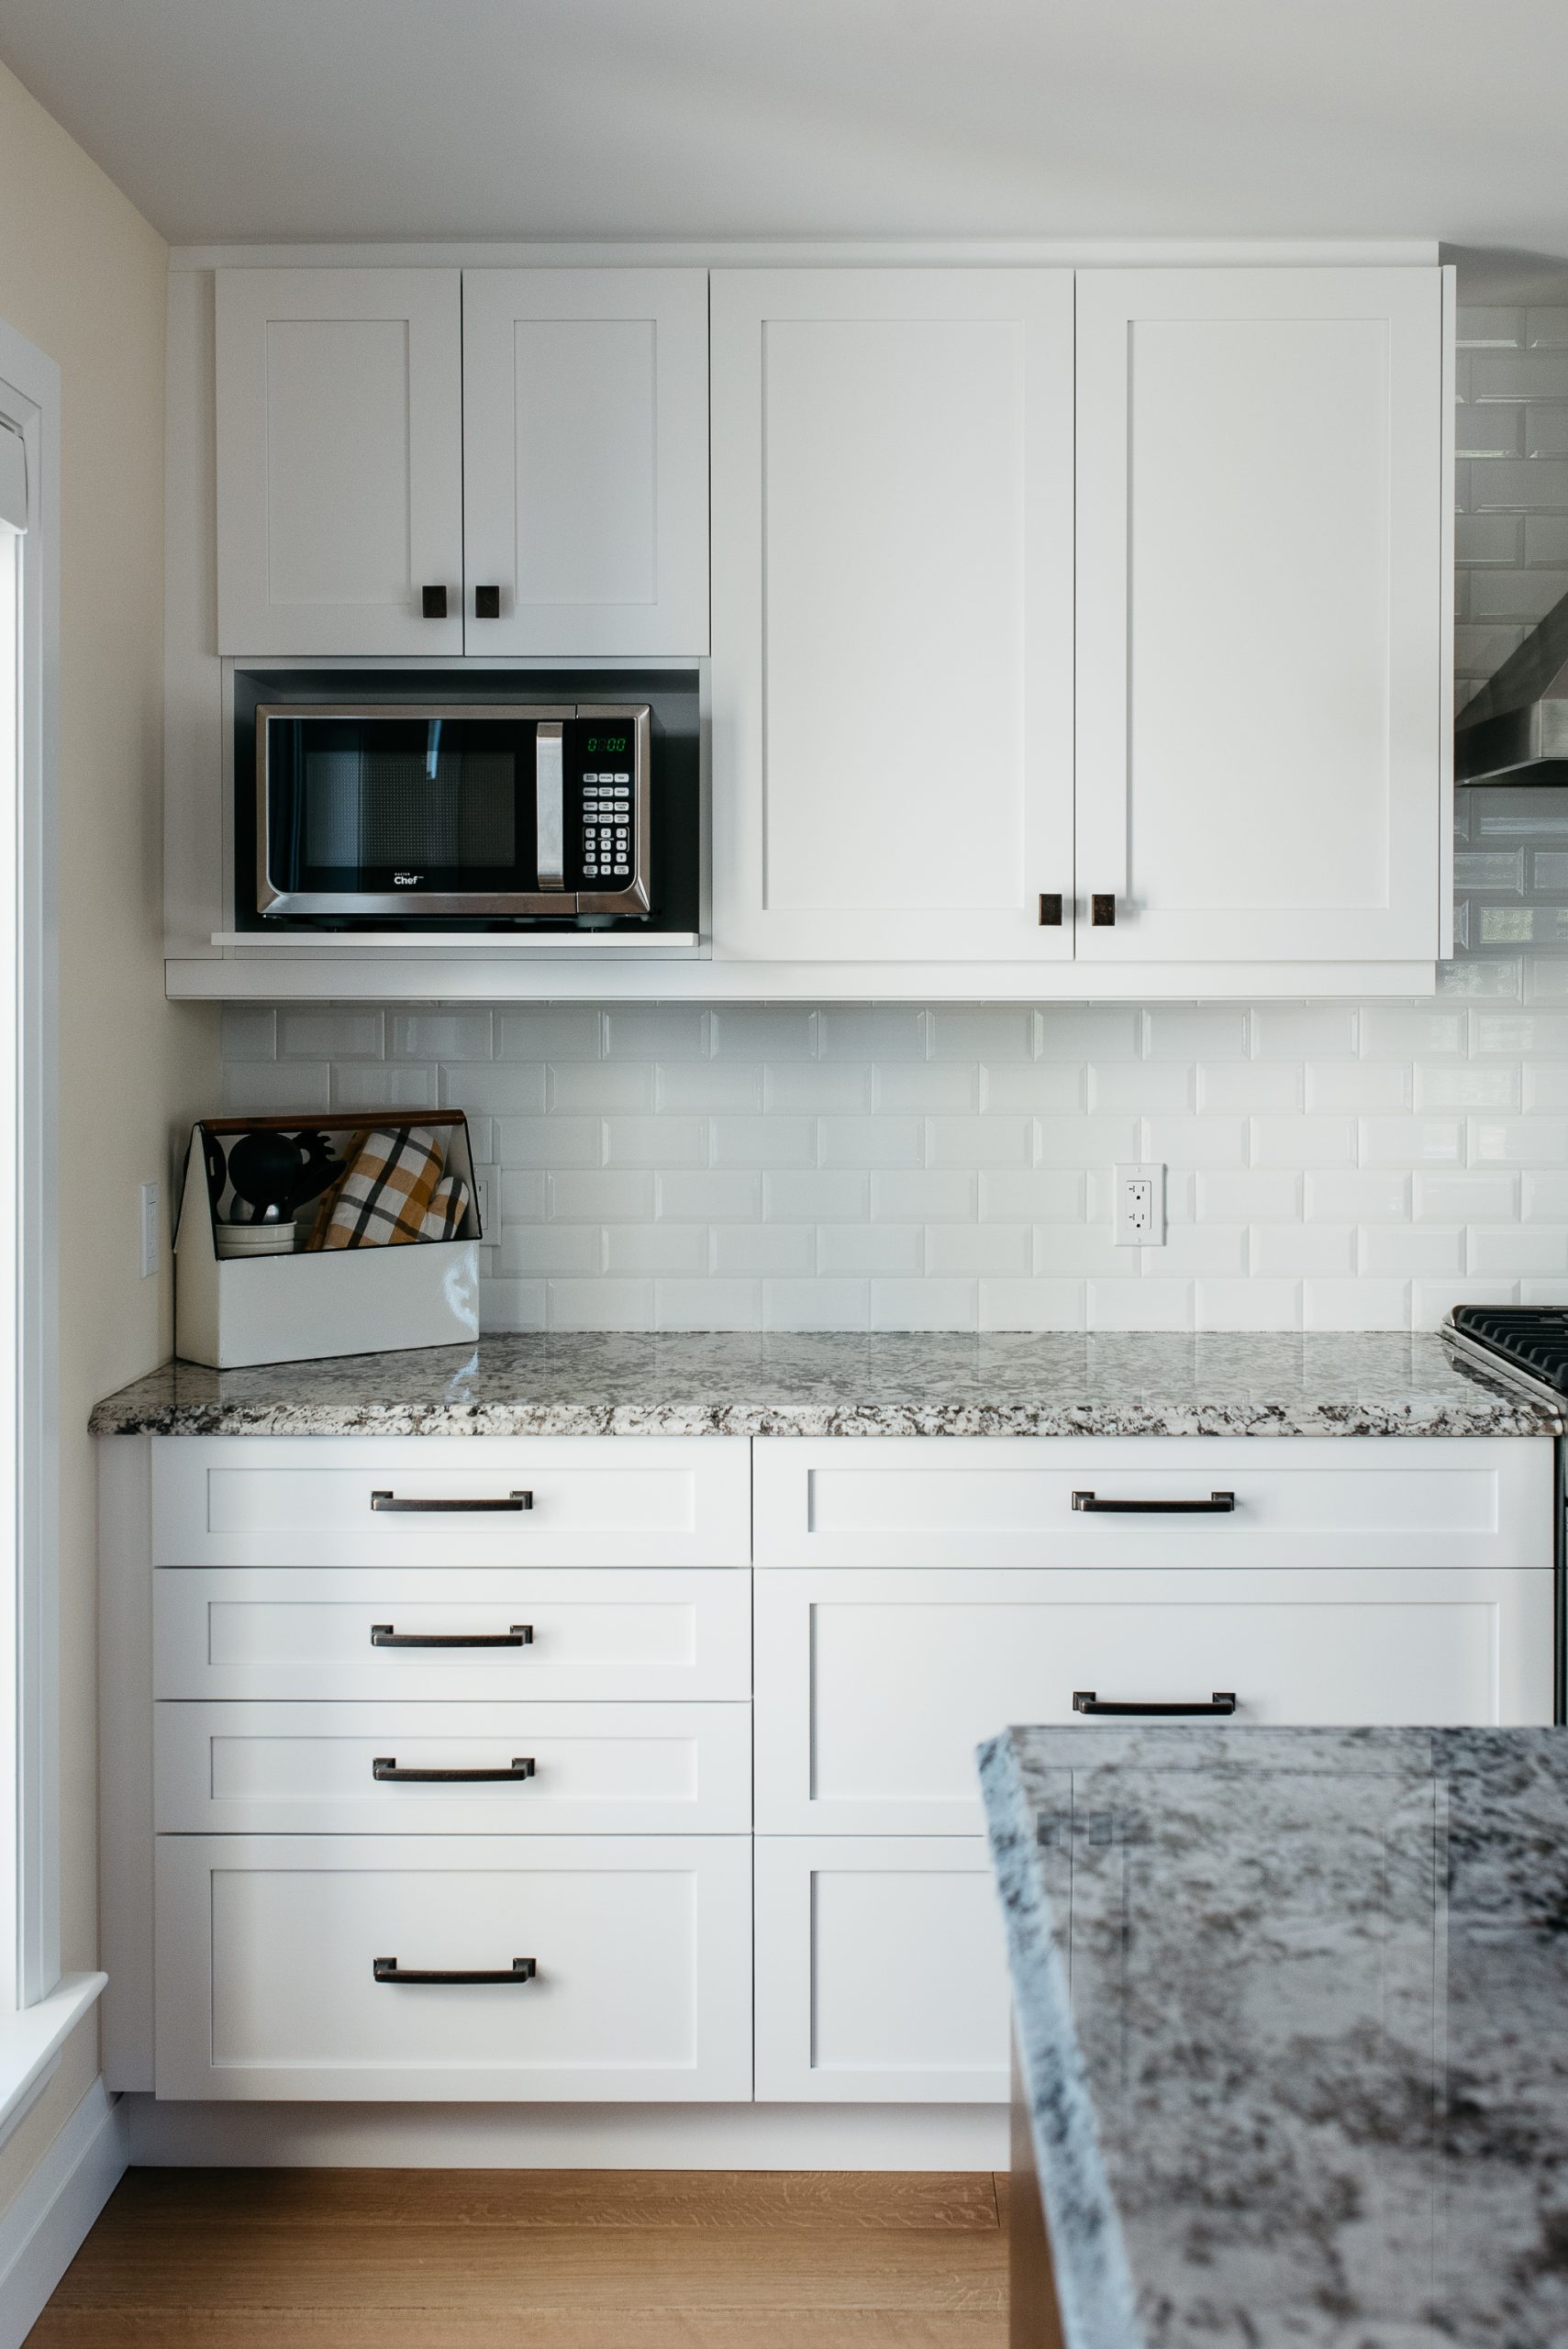 A gorgeous kitchen remodel featuring custom cabinetry and island by SSP Cabinetry and Millwork